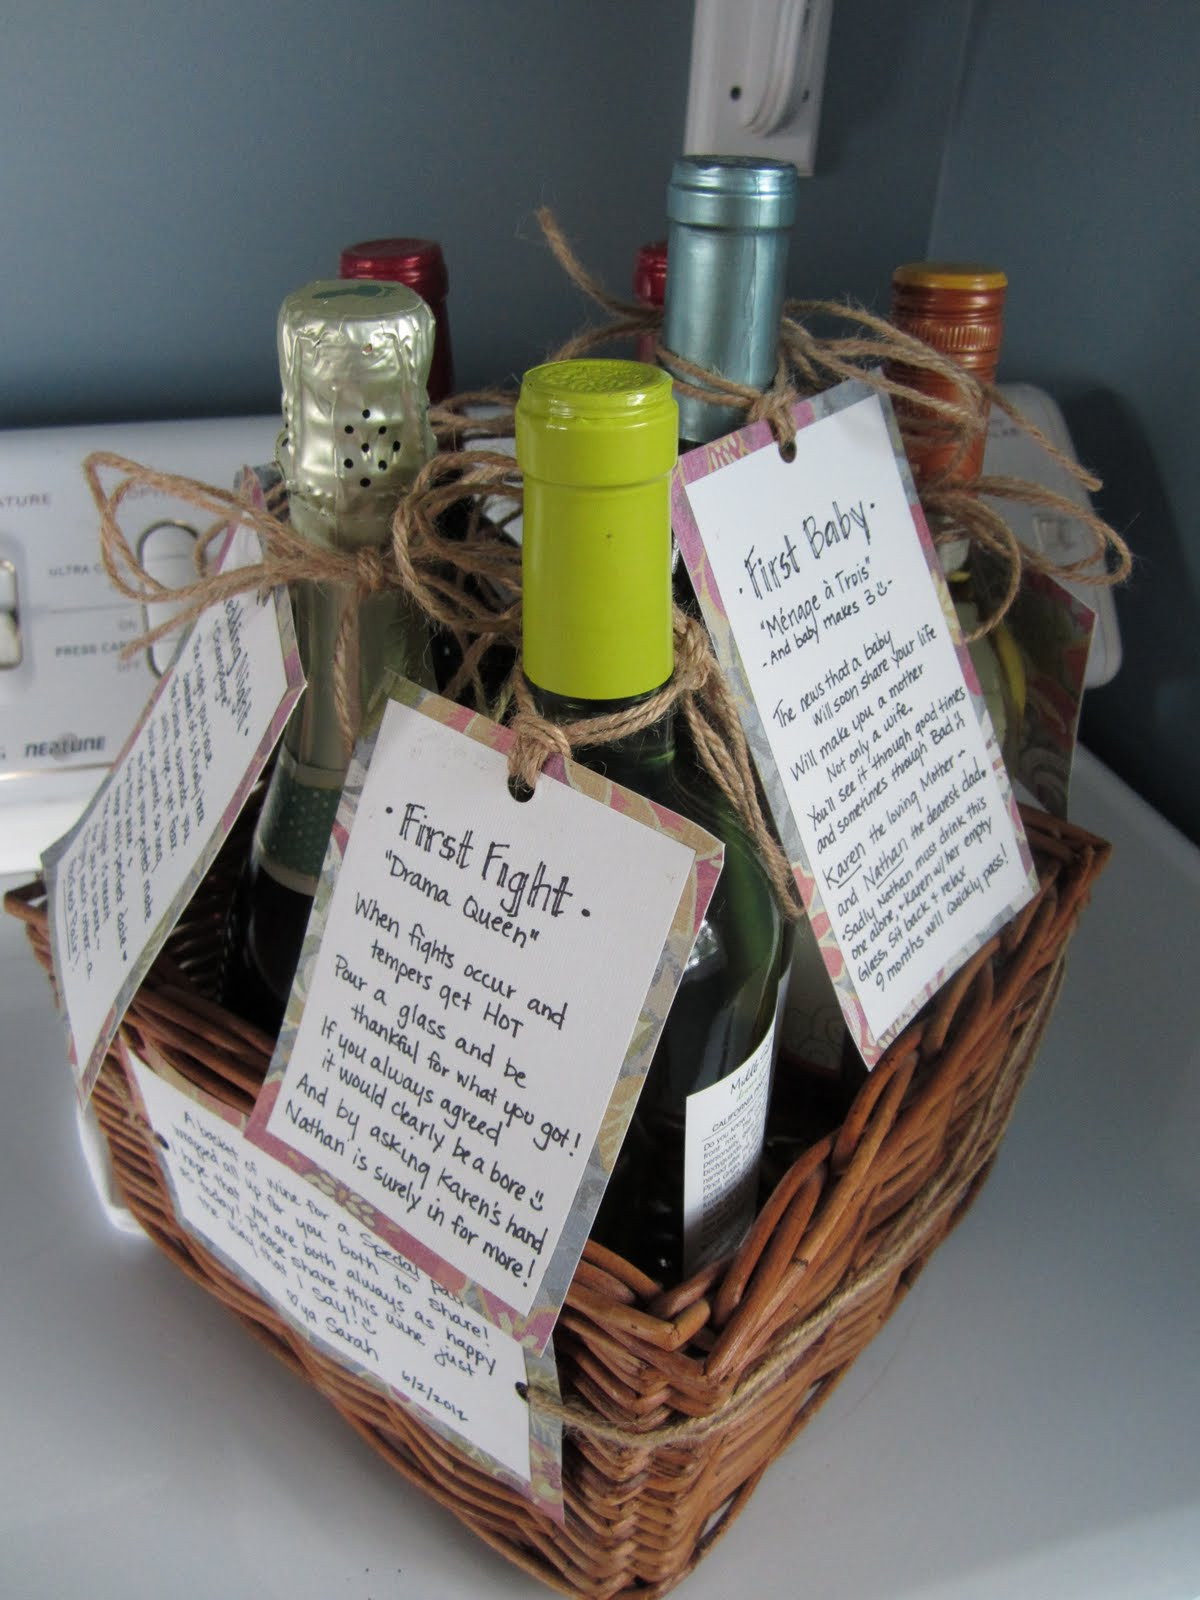 Good Wedding Gifts
 5 Thoughtful Wedding Shower Gifts that Might Not Be on the